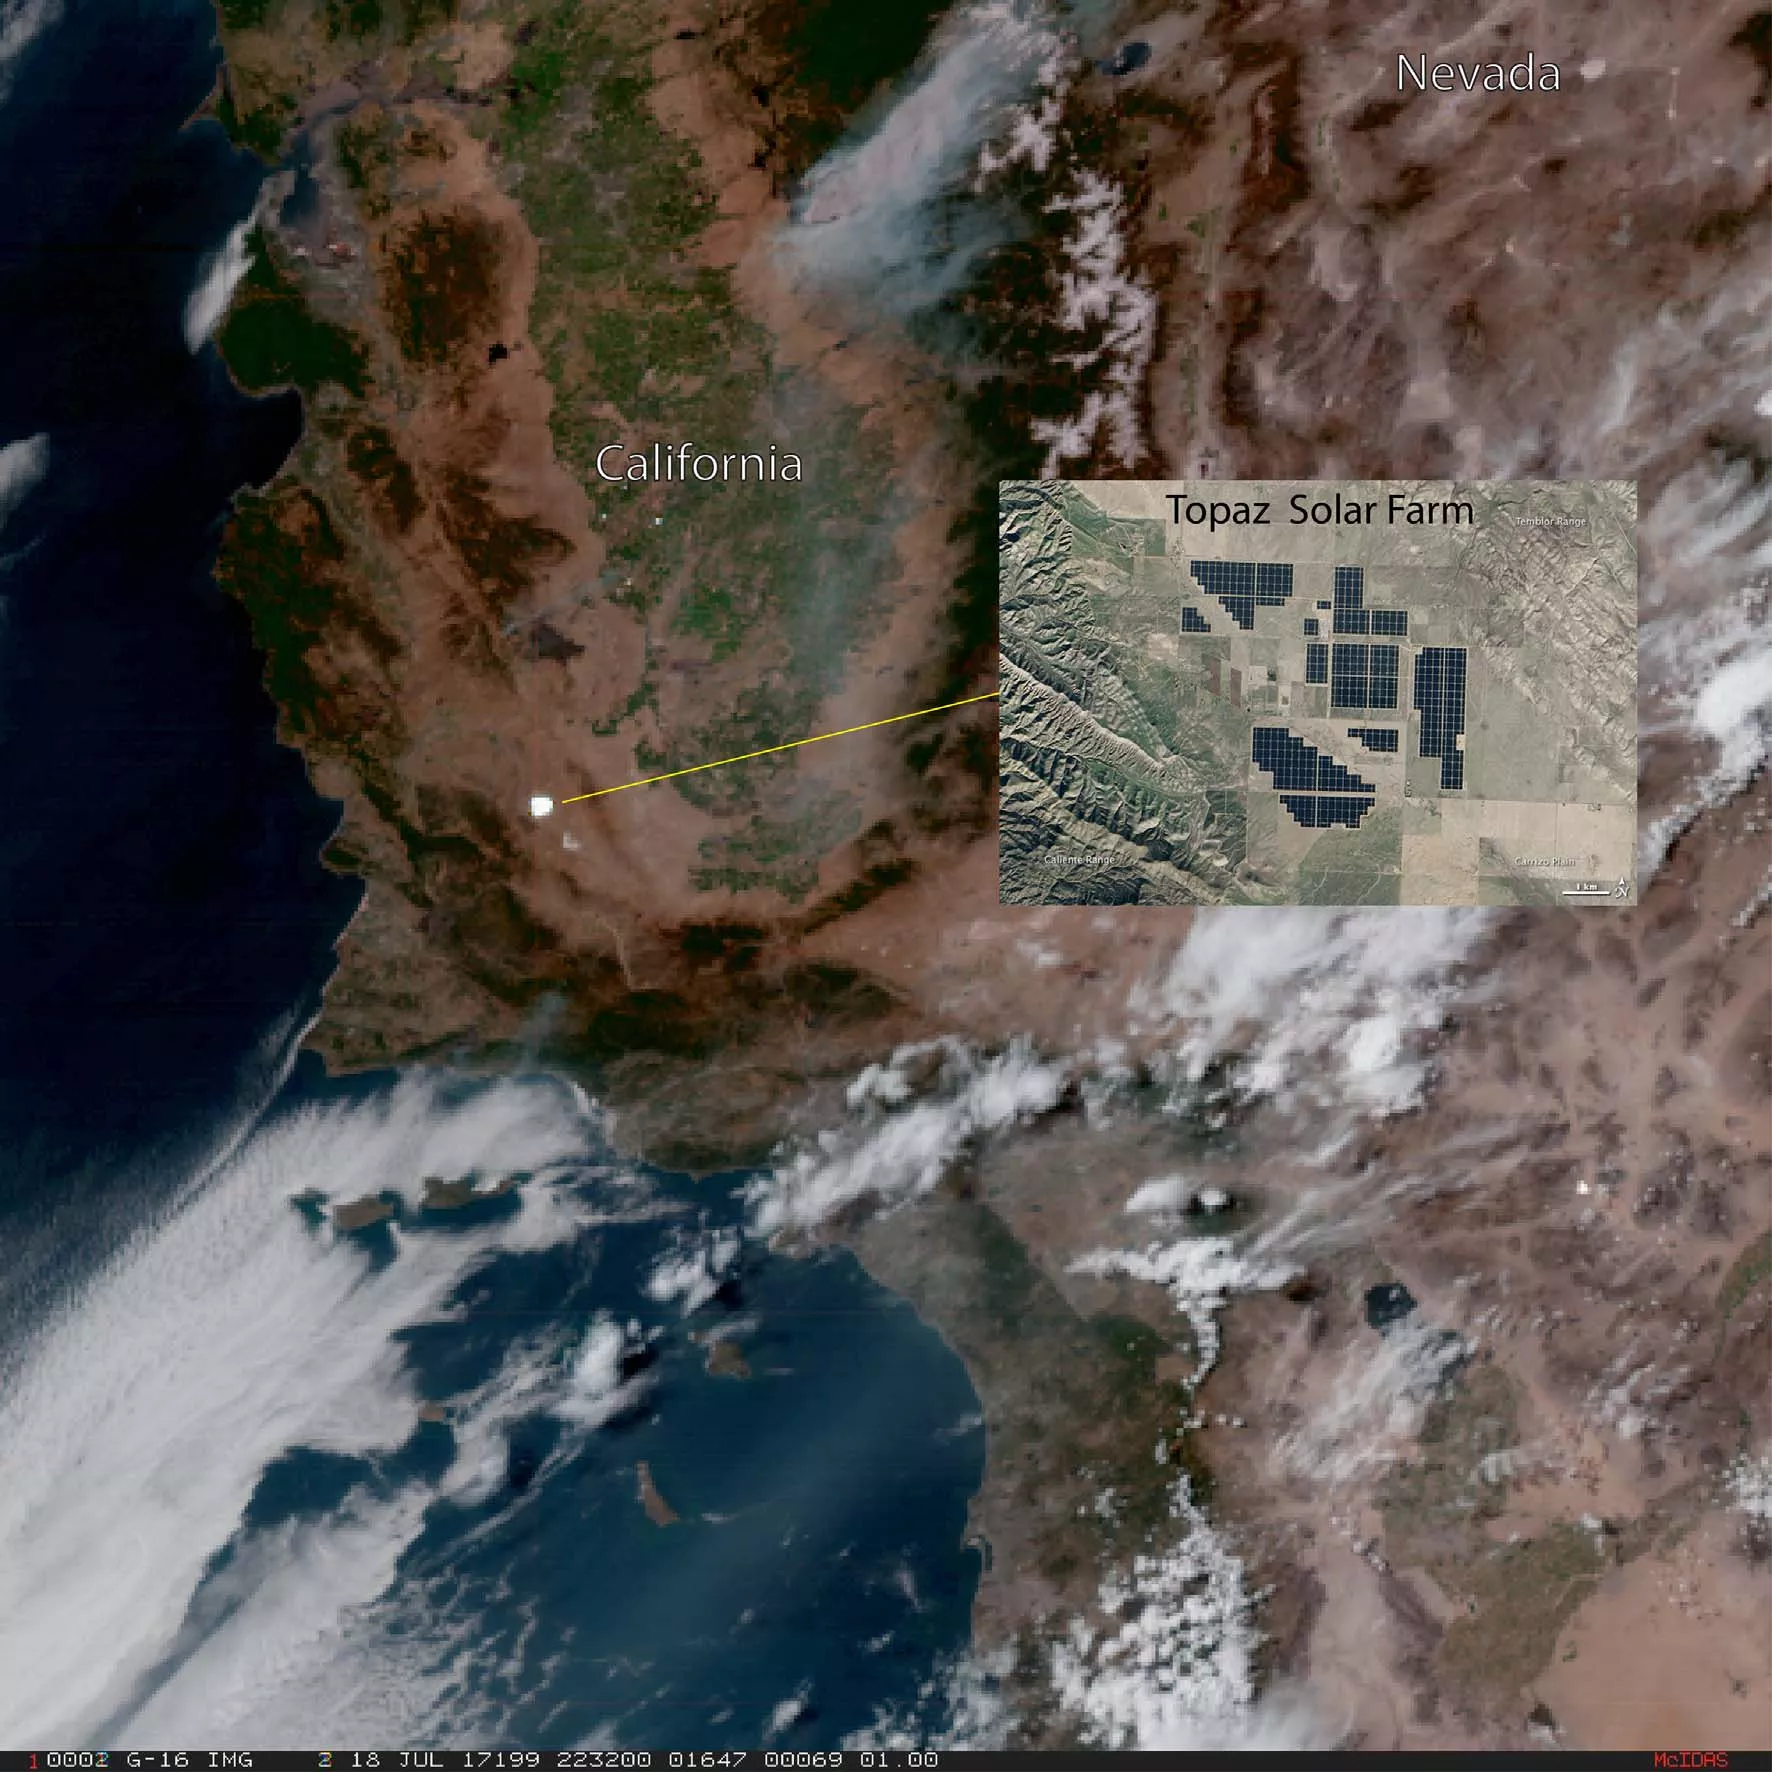 GOES-16 true color imagery over California collected on July 18, 2017 shows the reflection of sunlight off solar panels at the Topaz Solar Farm